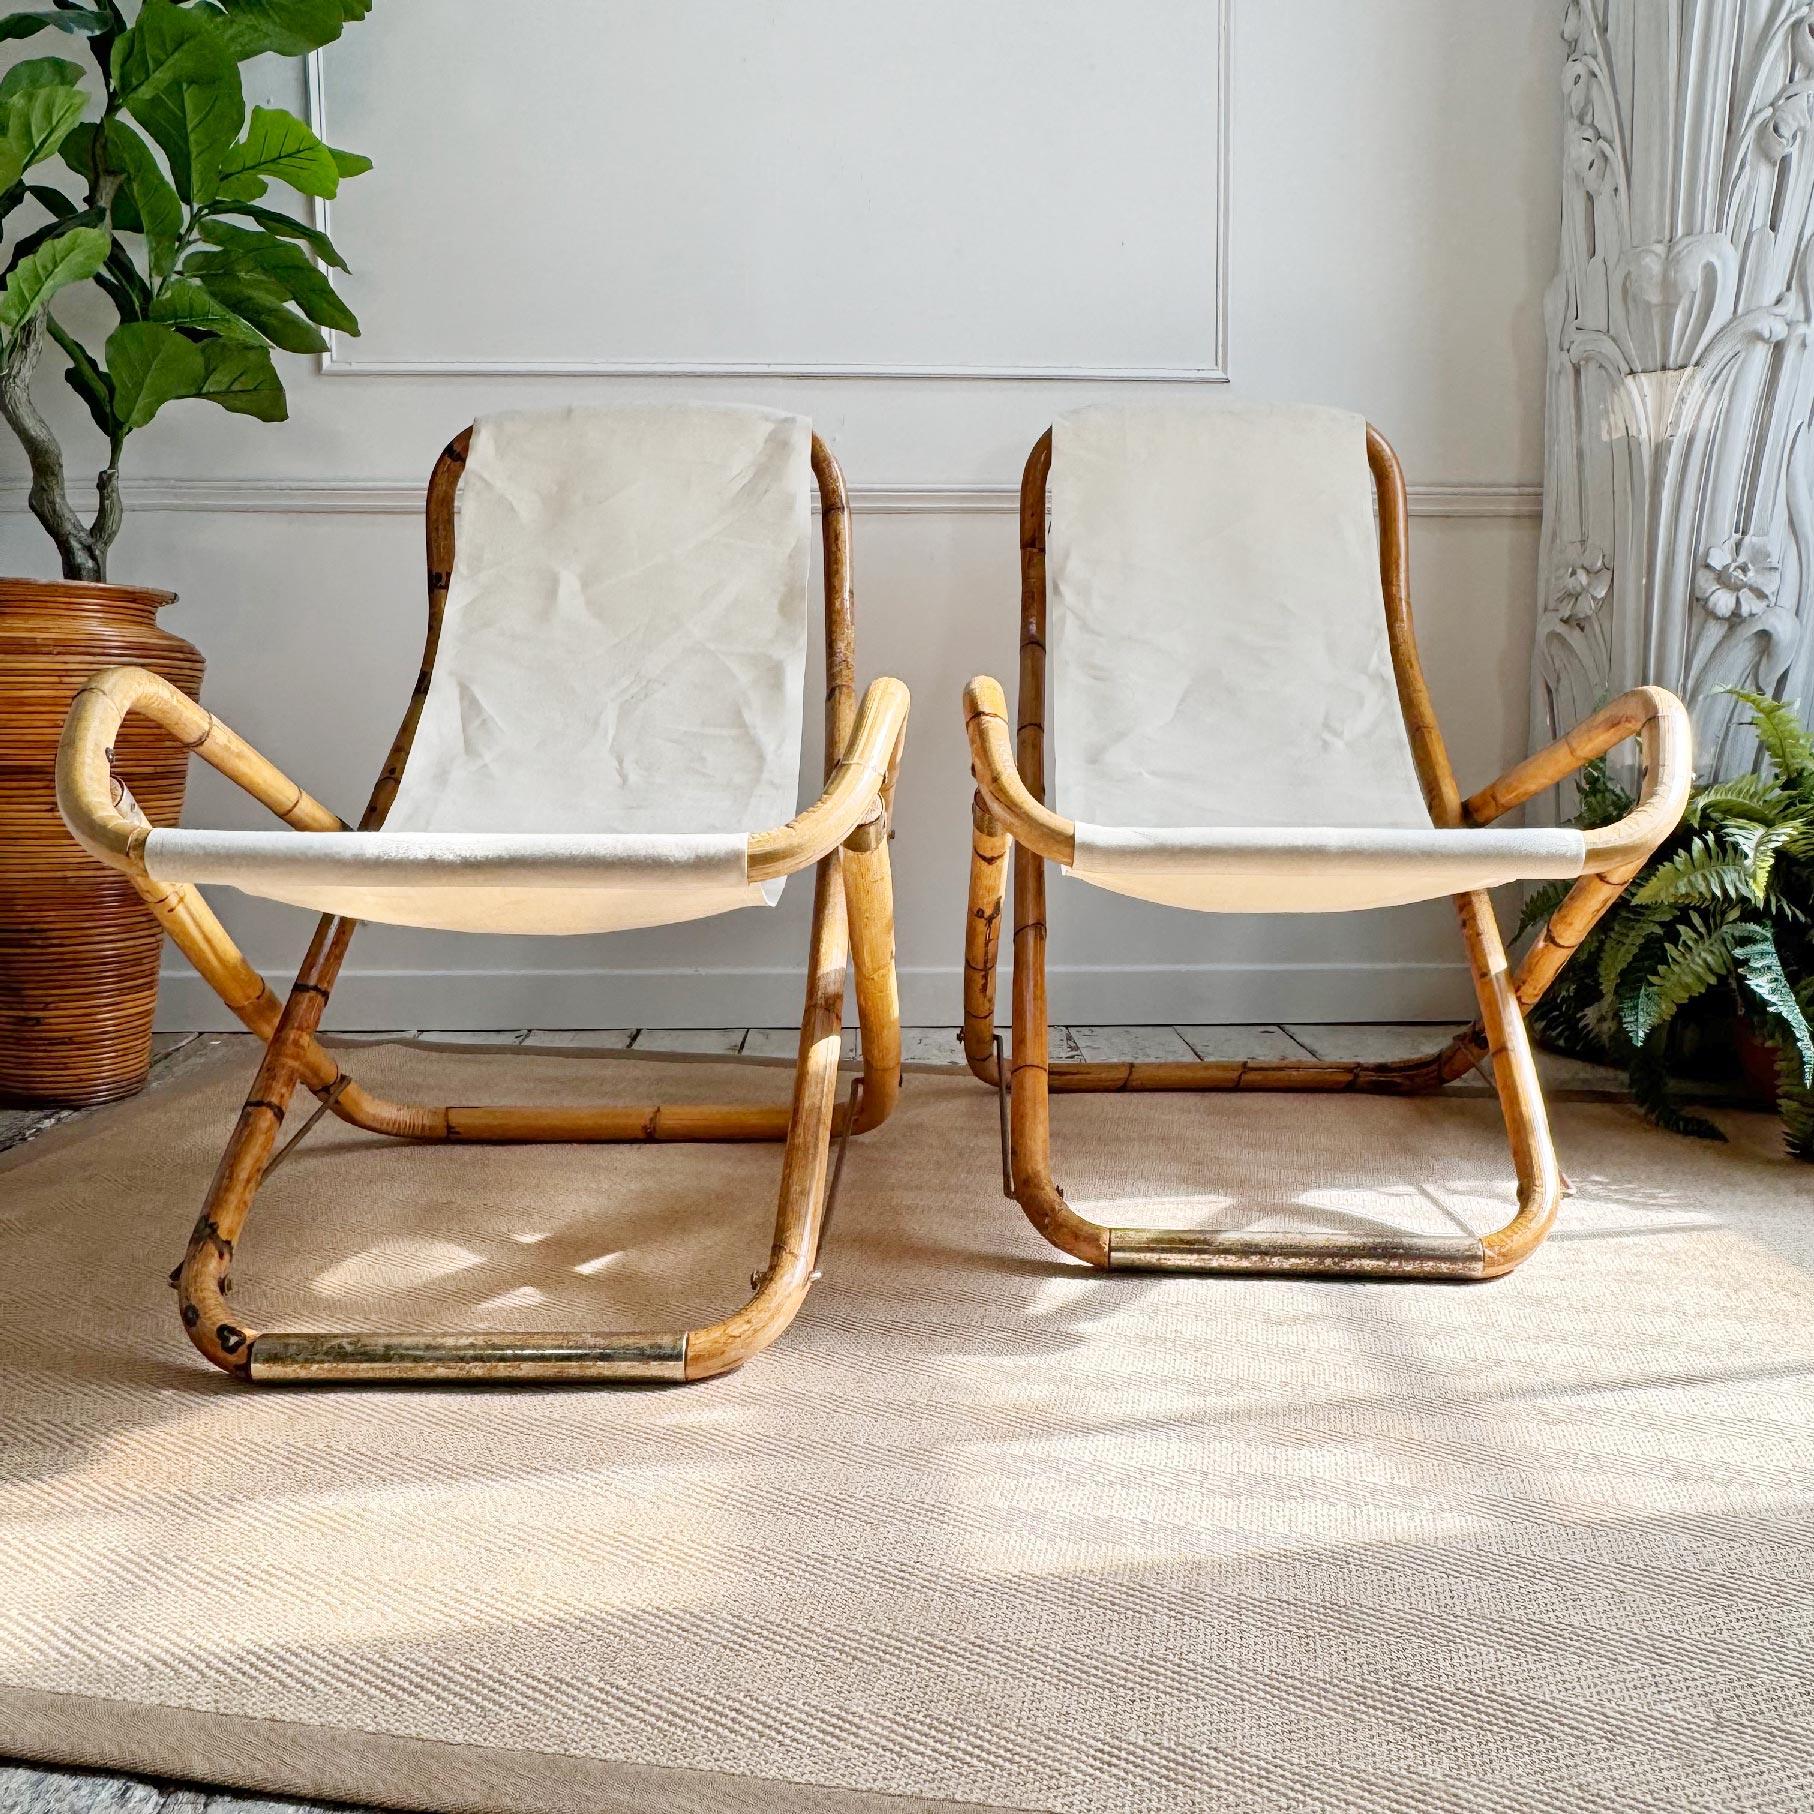 An exceptional pair of 1960's Italian lounging deck chairs, hand crafted from bamboo with brass plated foot rests and end caps, off white fabric seats. These are beautiful rare survivors and in very good vintage condition, the brass plating has